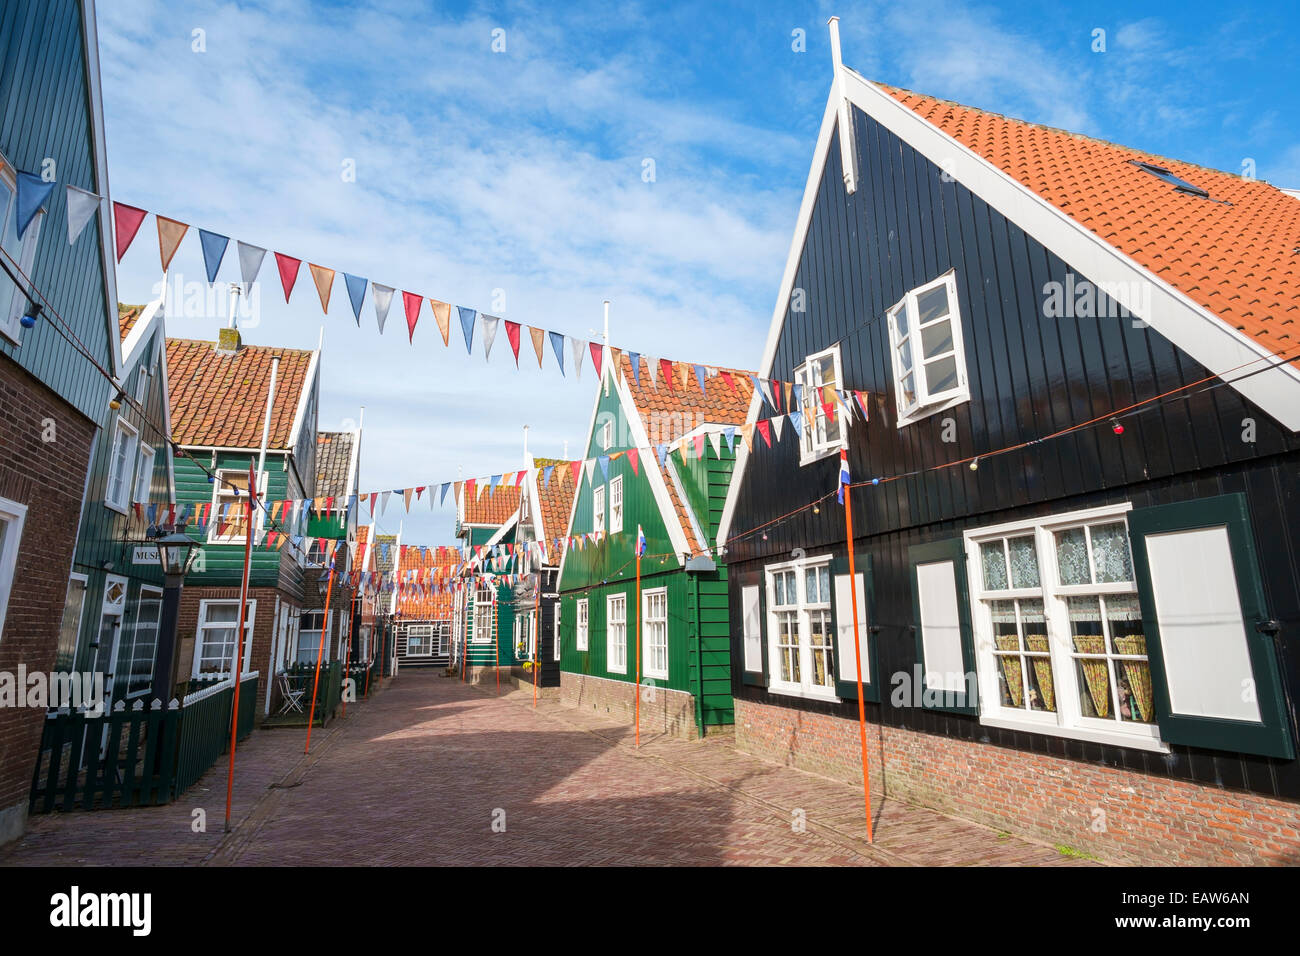 Traditional wooden houses in Marken, North Holland, Netherlands Stock Photo